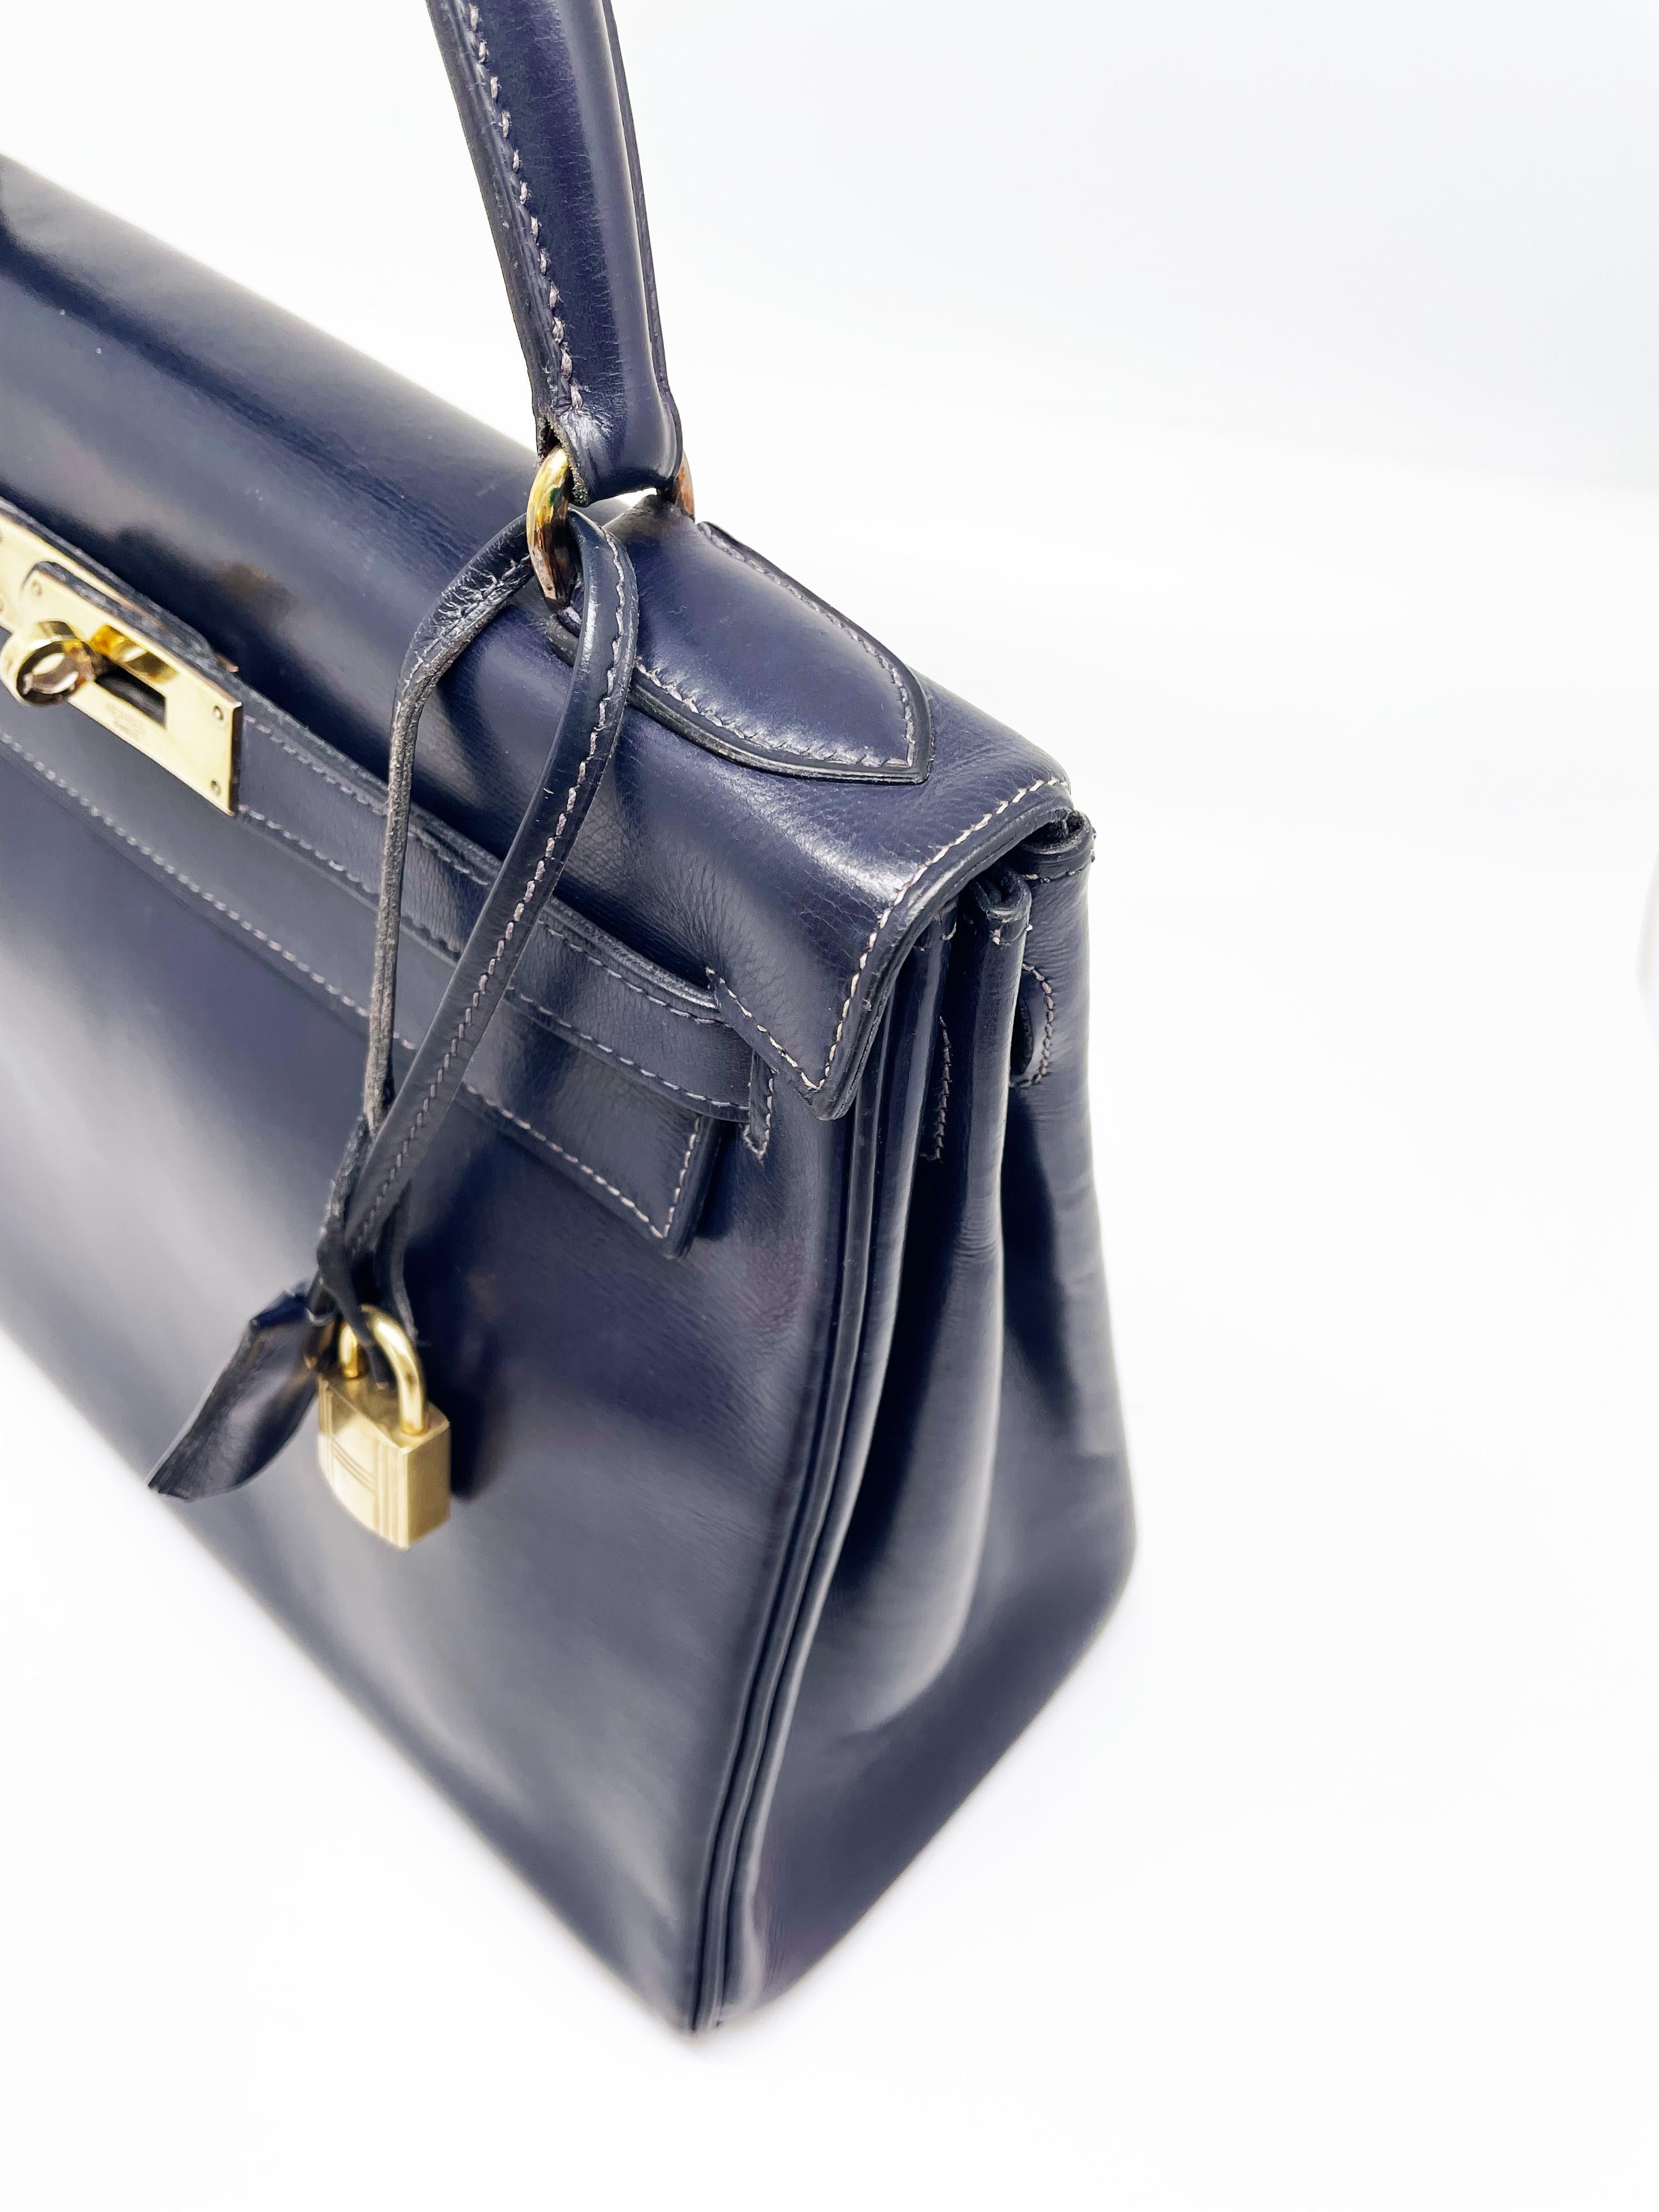 Exceptional Hermès Kelly bag 28 returned in navy box leather 1